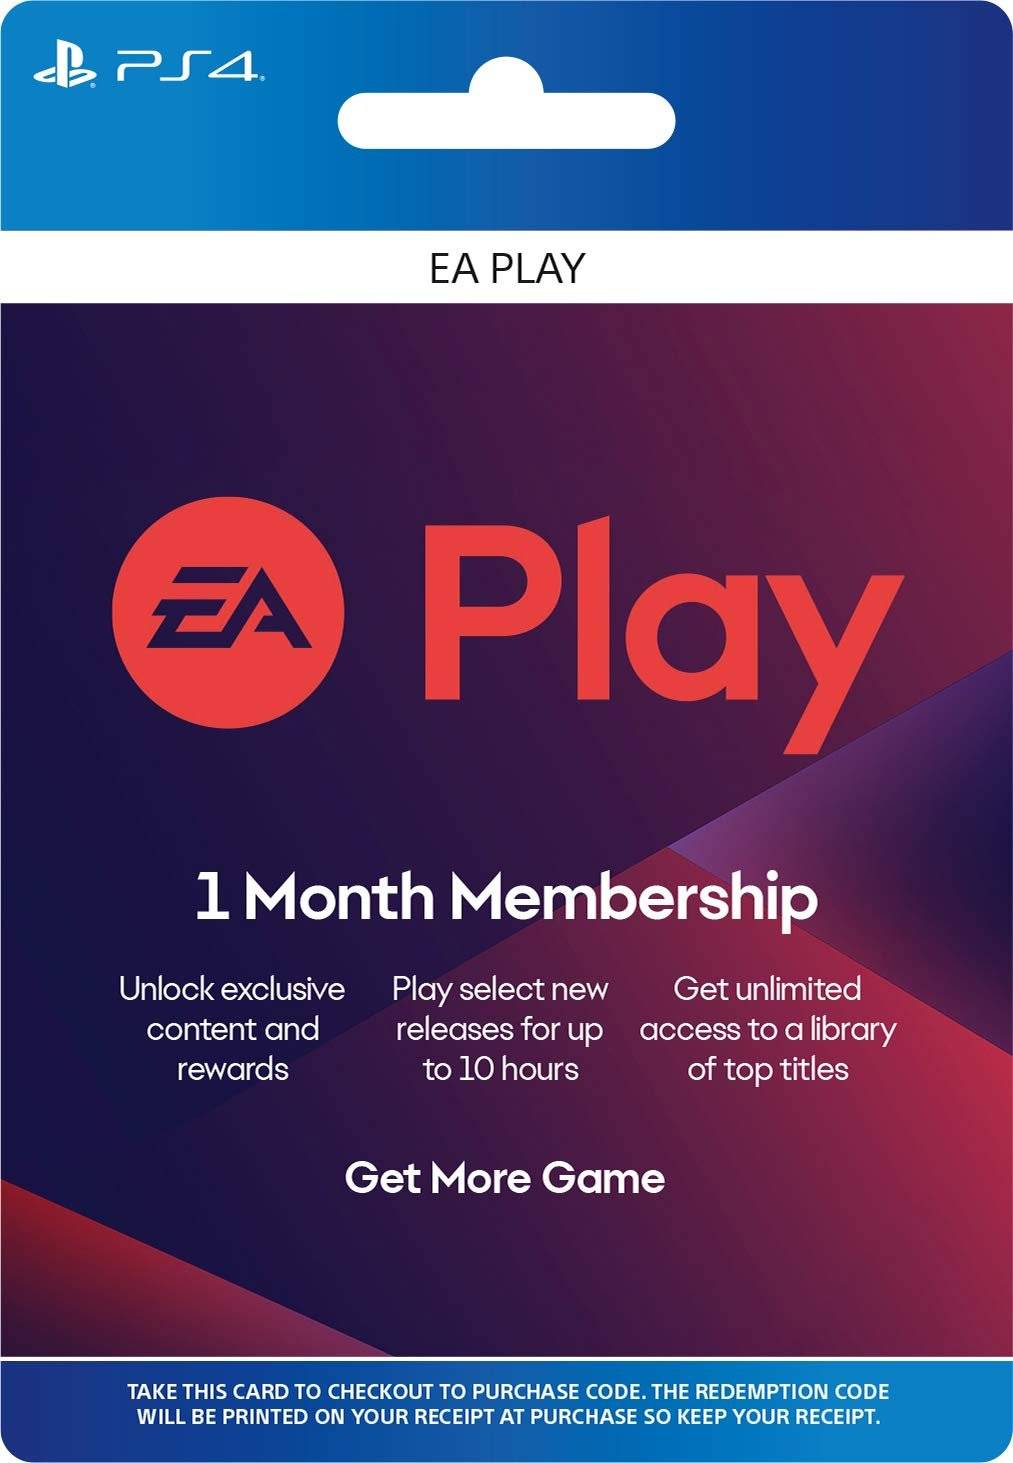 EA Play Pro 1 Month